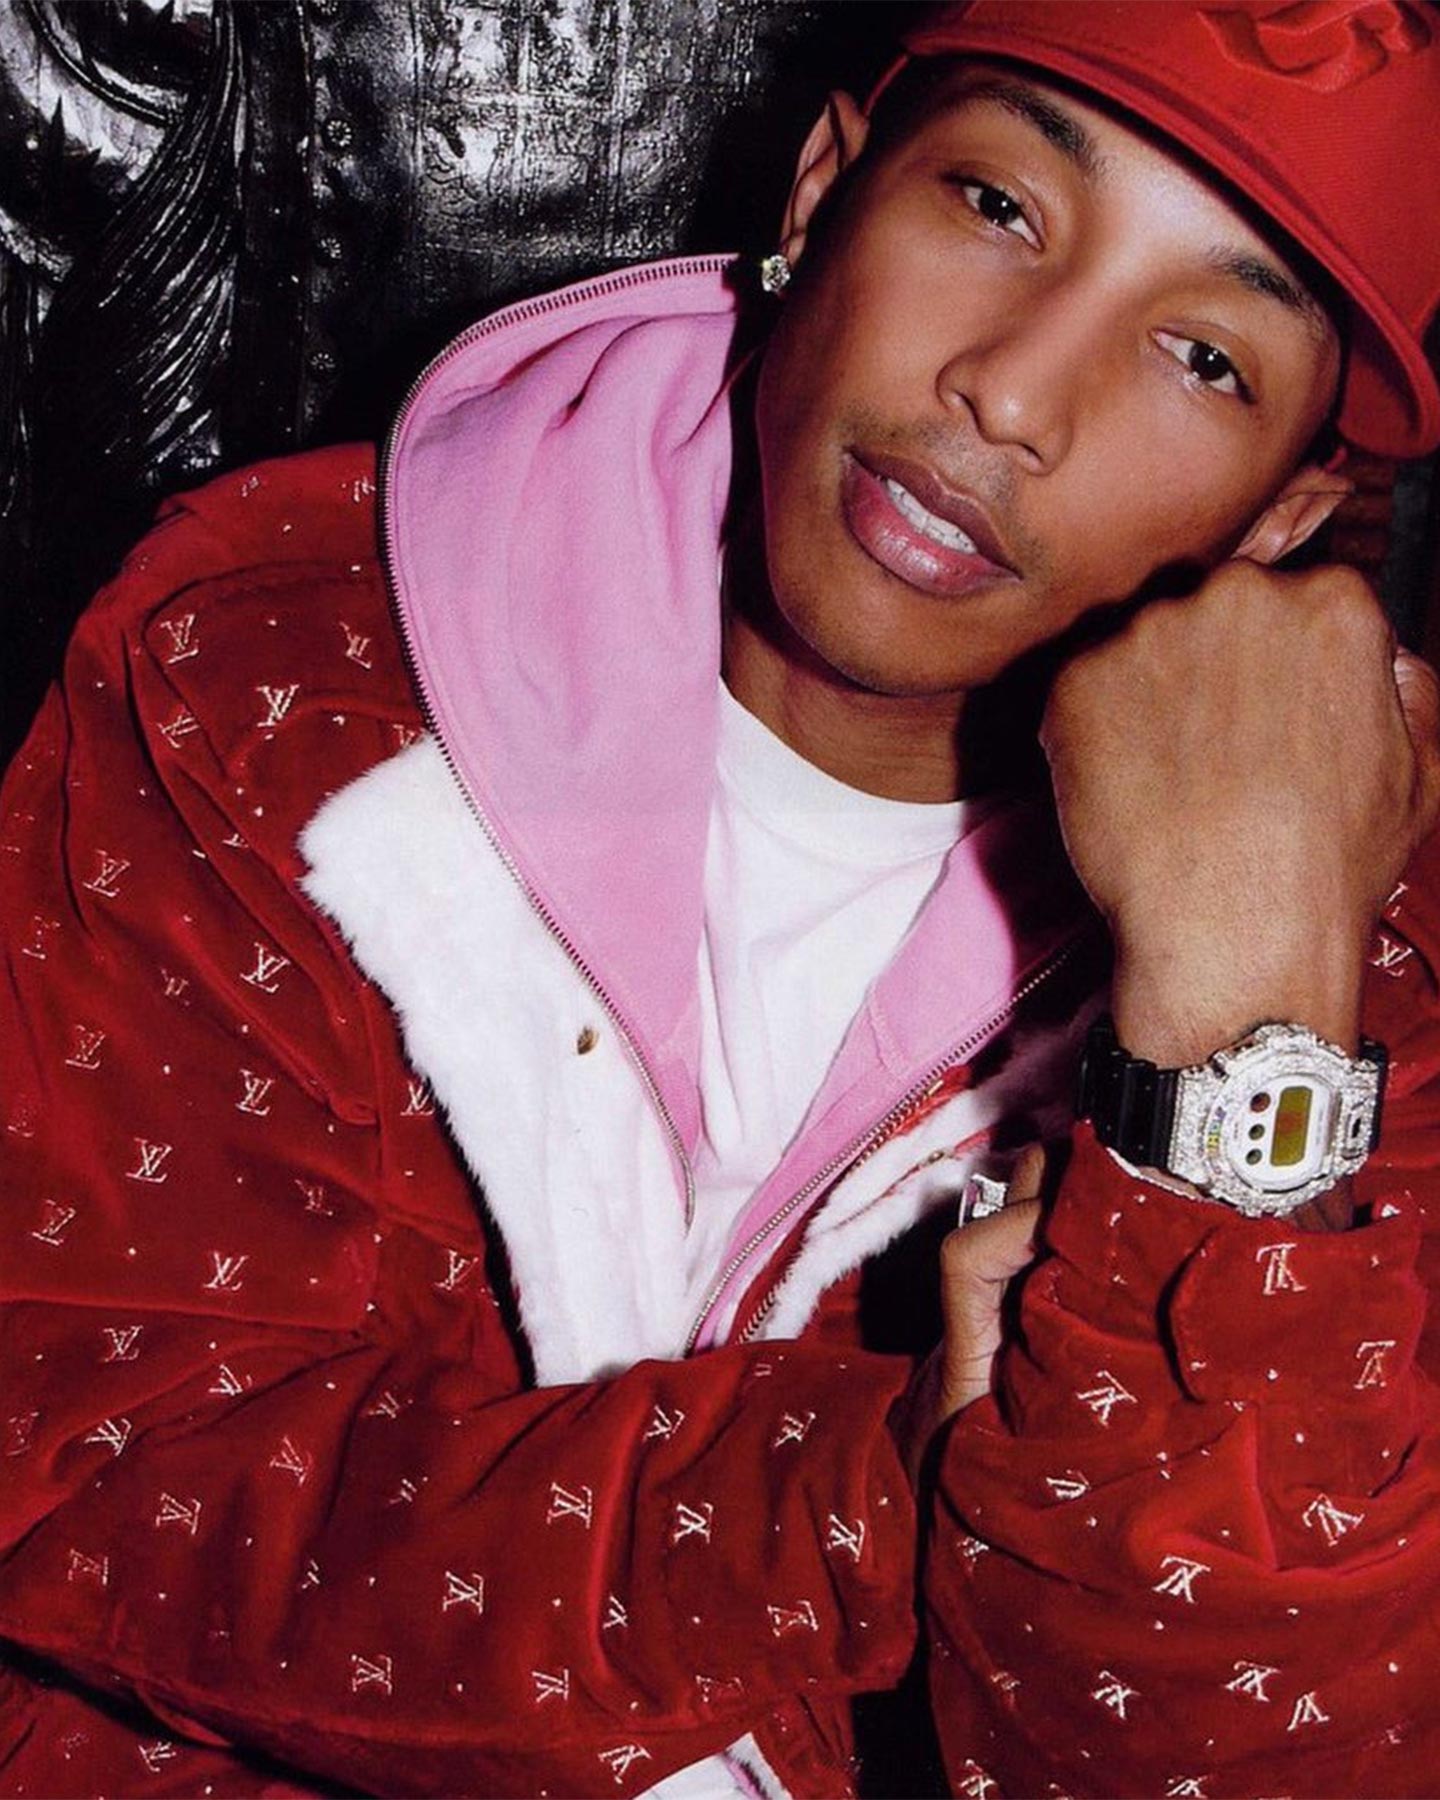 The American musician and fashion entrepreneur Pharrell Williams has been named the creative director of Louis Vuitton menswear